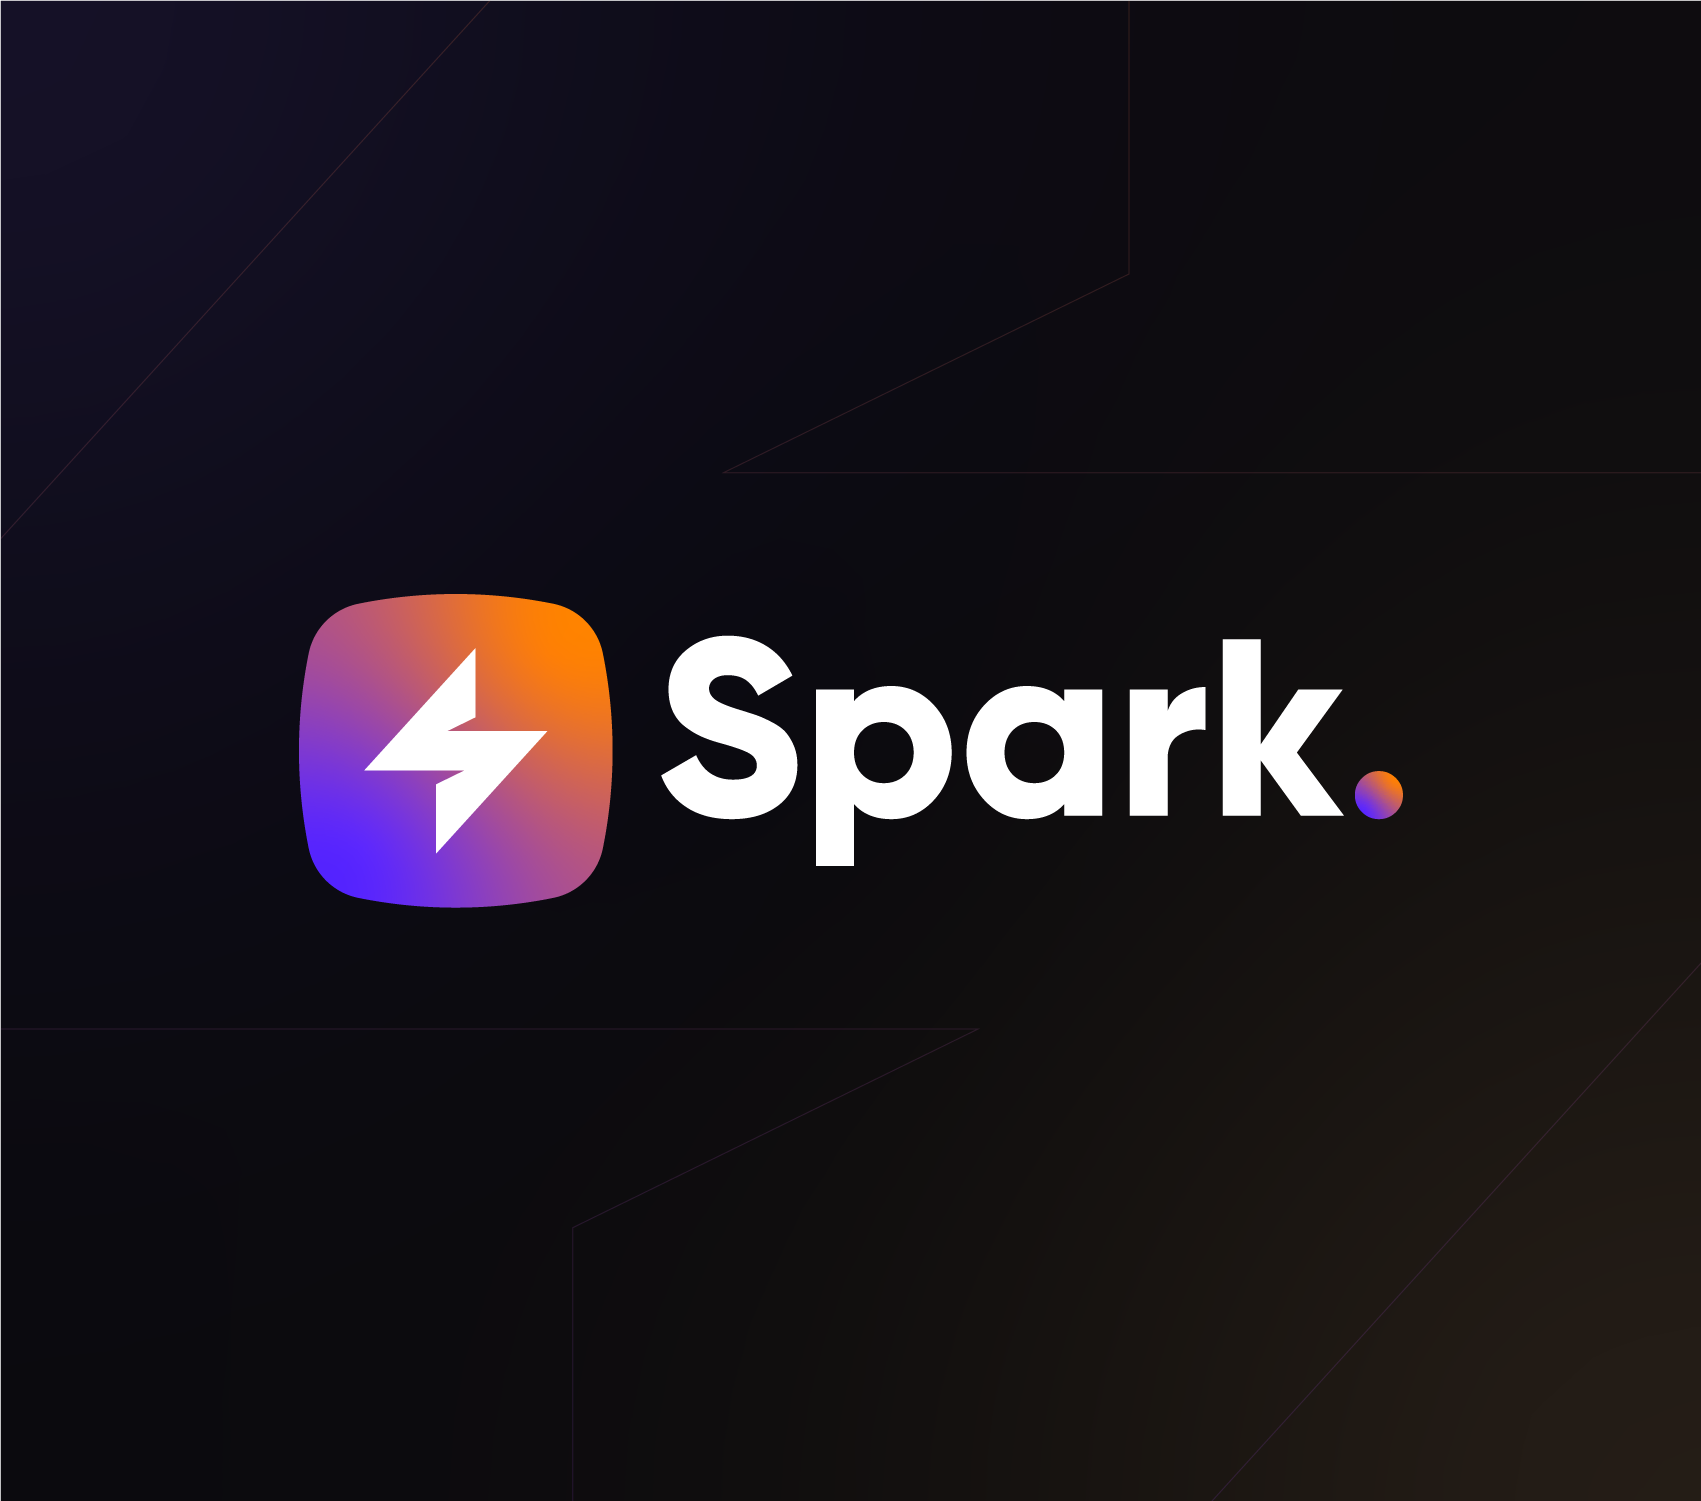 Simple Abstract Spark Logo Design Black And White Flat Geometry Star  Logotype Stock Illustration - Download Image Now - iStock